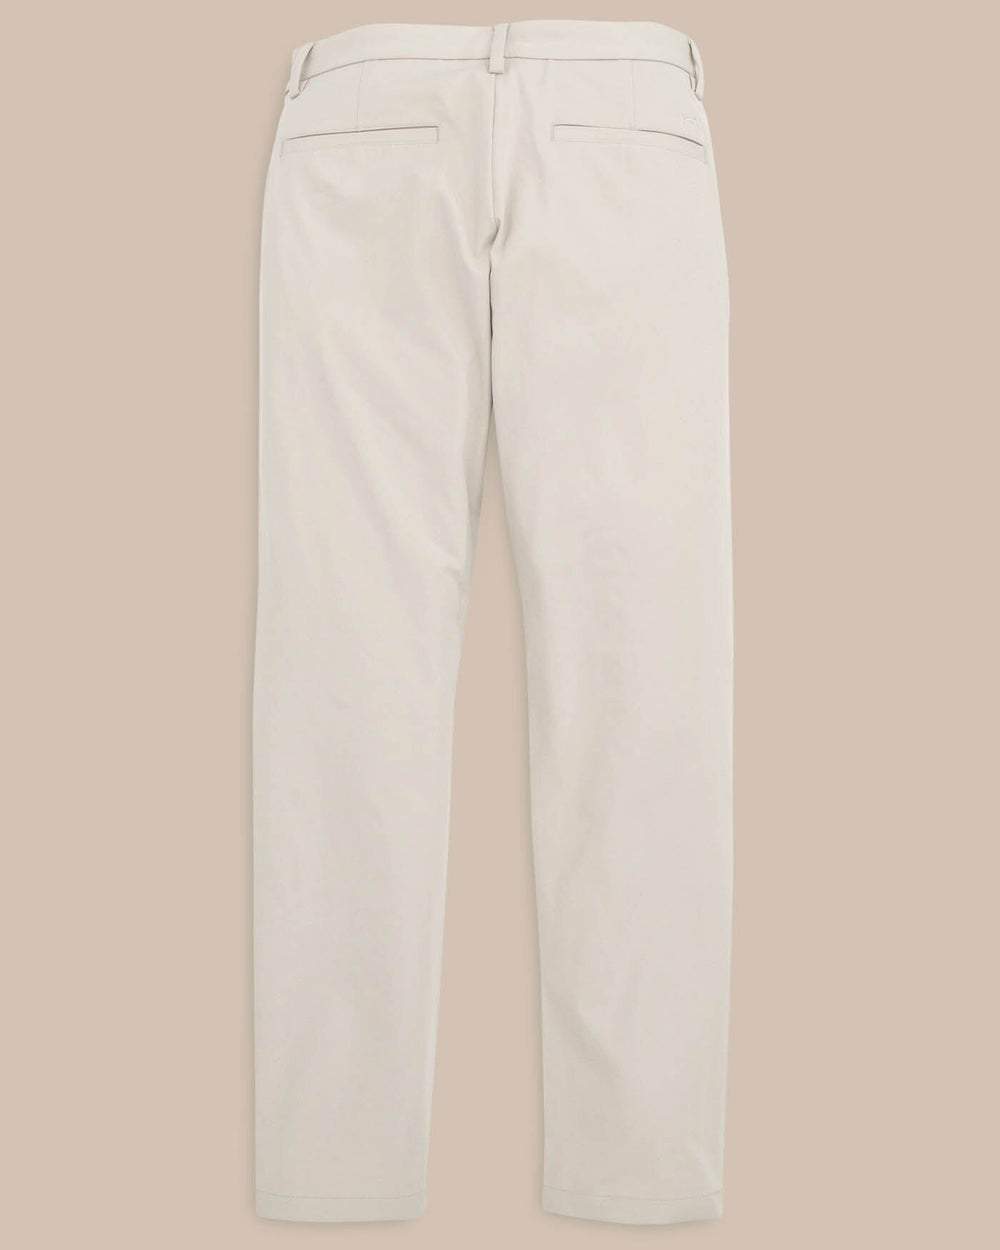 The flat back view of the Men's Jack Performance Pant by Southern Tide - Putty